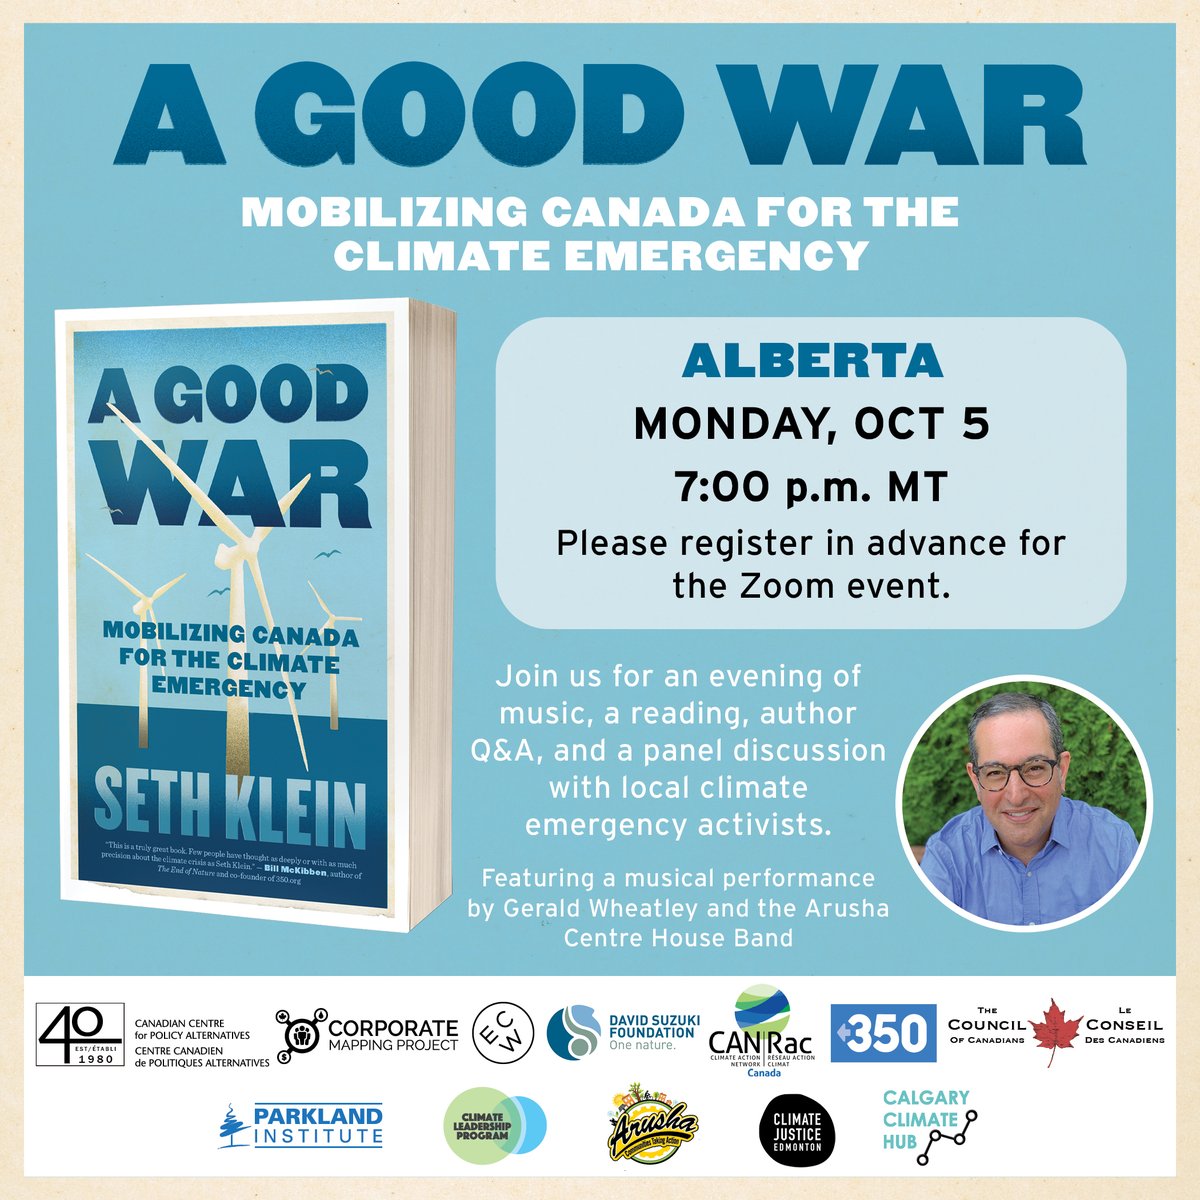 And Oct 5 @ 7:00 is the Alberta Book Launch, with musical guests Gerald Weatley and the Arusha Centre Band, and a great panel of local climate emergency activists. You can register here:  https://us02web.zoom.us/webinar/register/WN_siUoonIEQ_CFIQcBd6BJuA